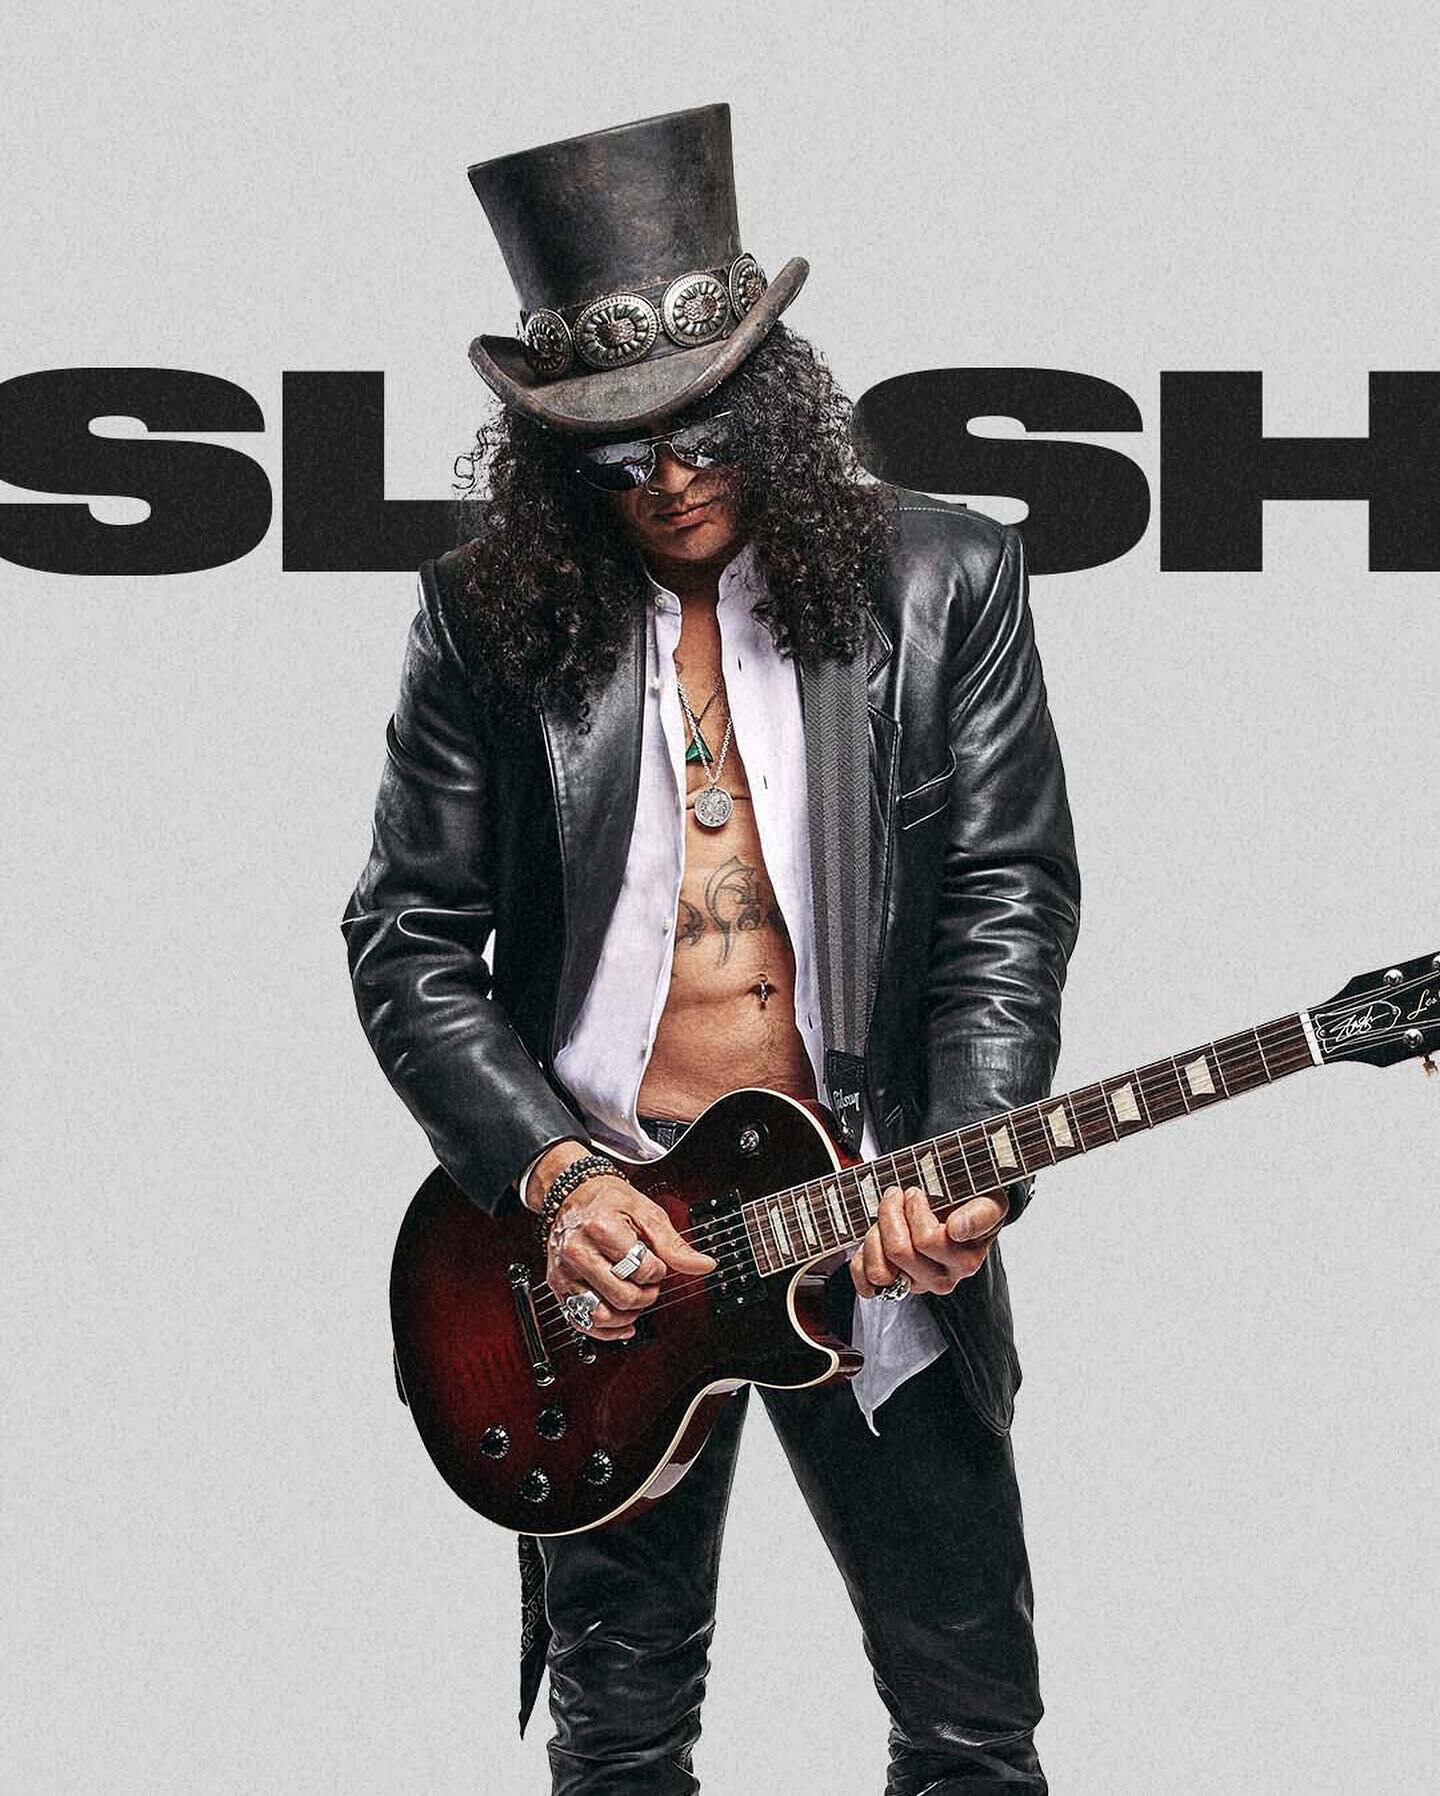 This website design for @slash was an absolute blast to create. 🎩 💀 🎸 

For those that know me, I'm a bit music-obsessed. I have music on non-stop &mdash; usually in the realm of classic rock. I remember car ride's listening to Cheap Trick and oth